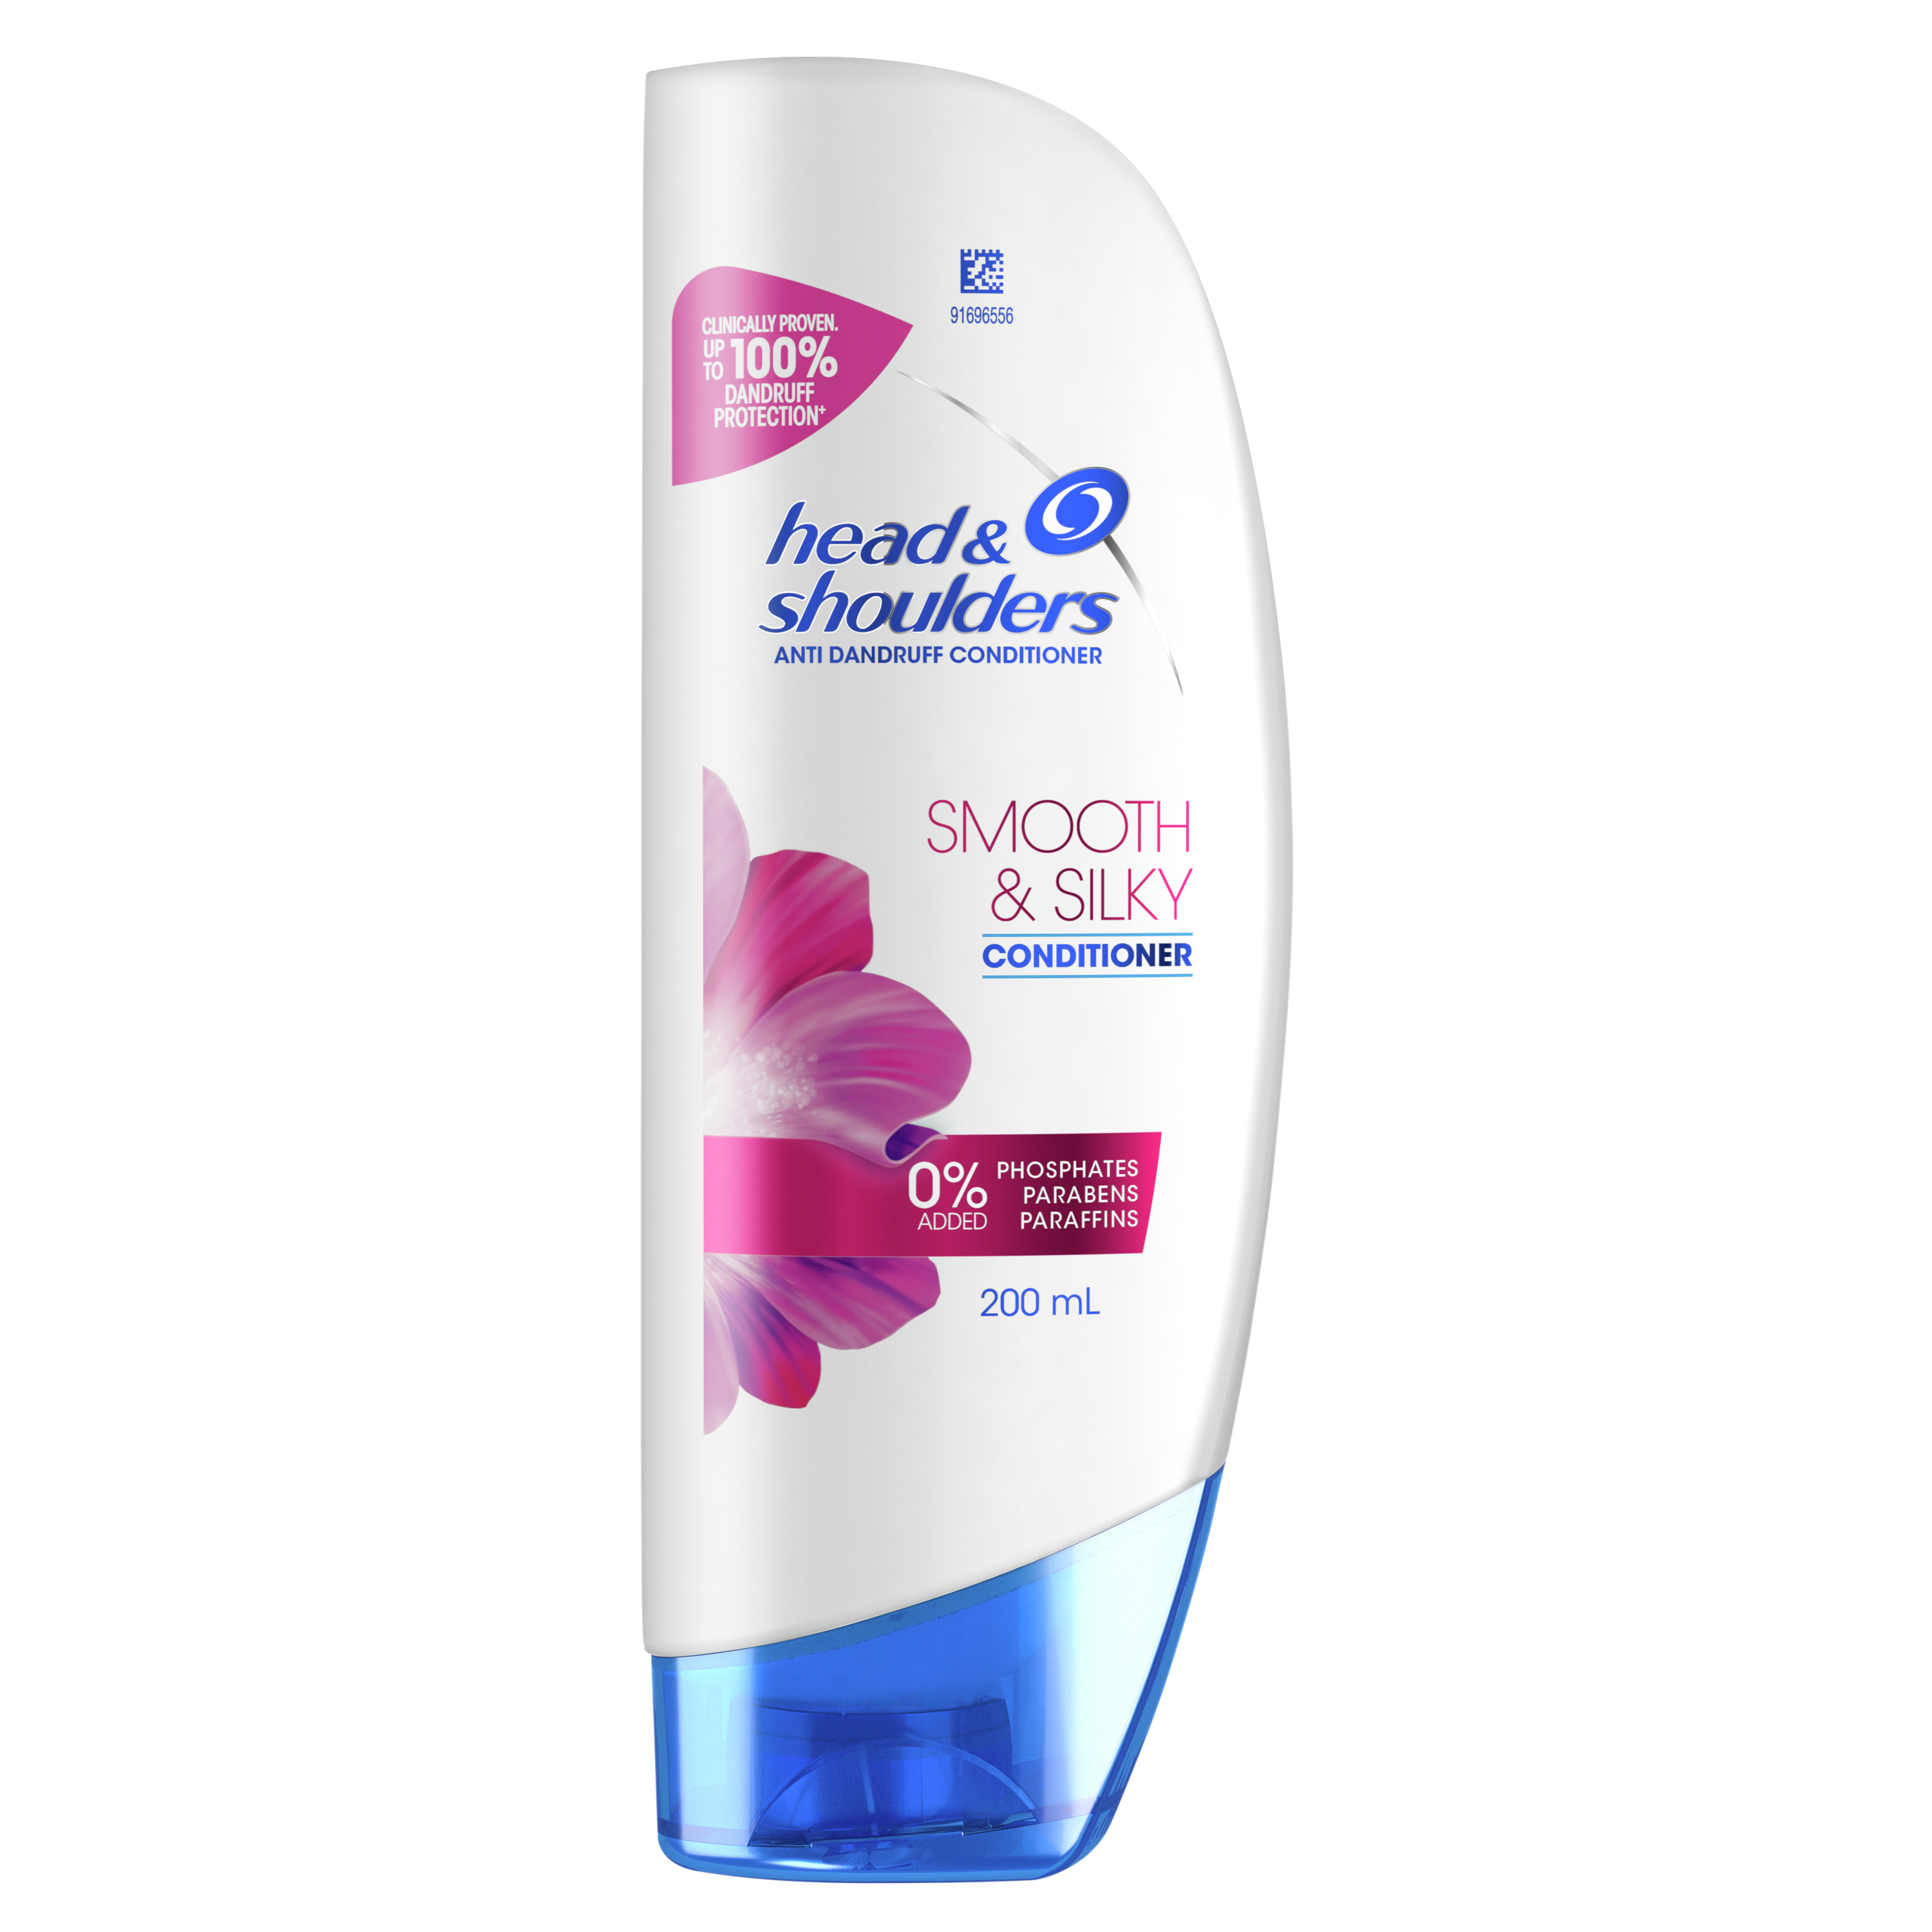 Smooth & Silky Conditioner for Frizzy Hair | Head & Shoulders AU